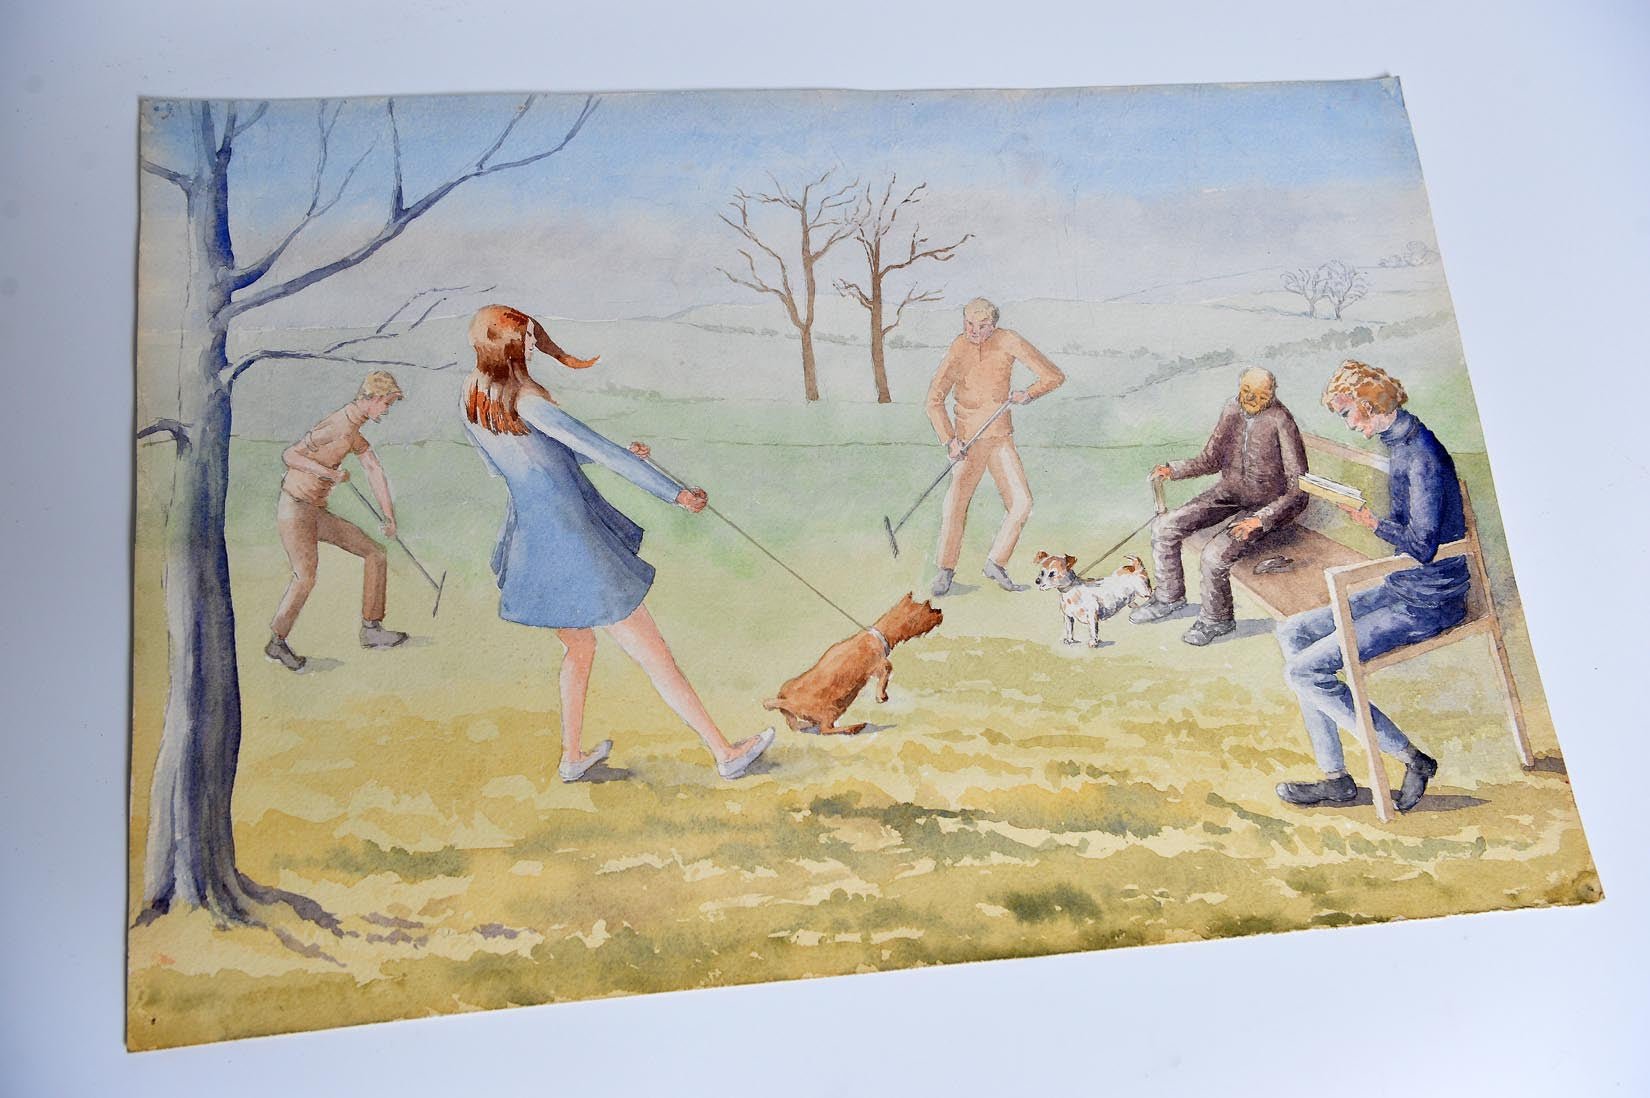 Dogs greeting in a park watercolour by A. Whitworth - Natalia Willmott